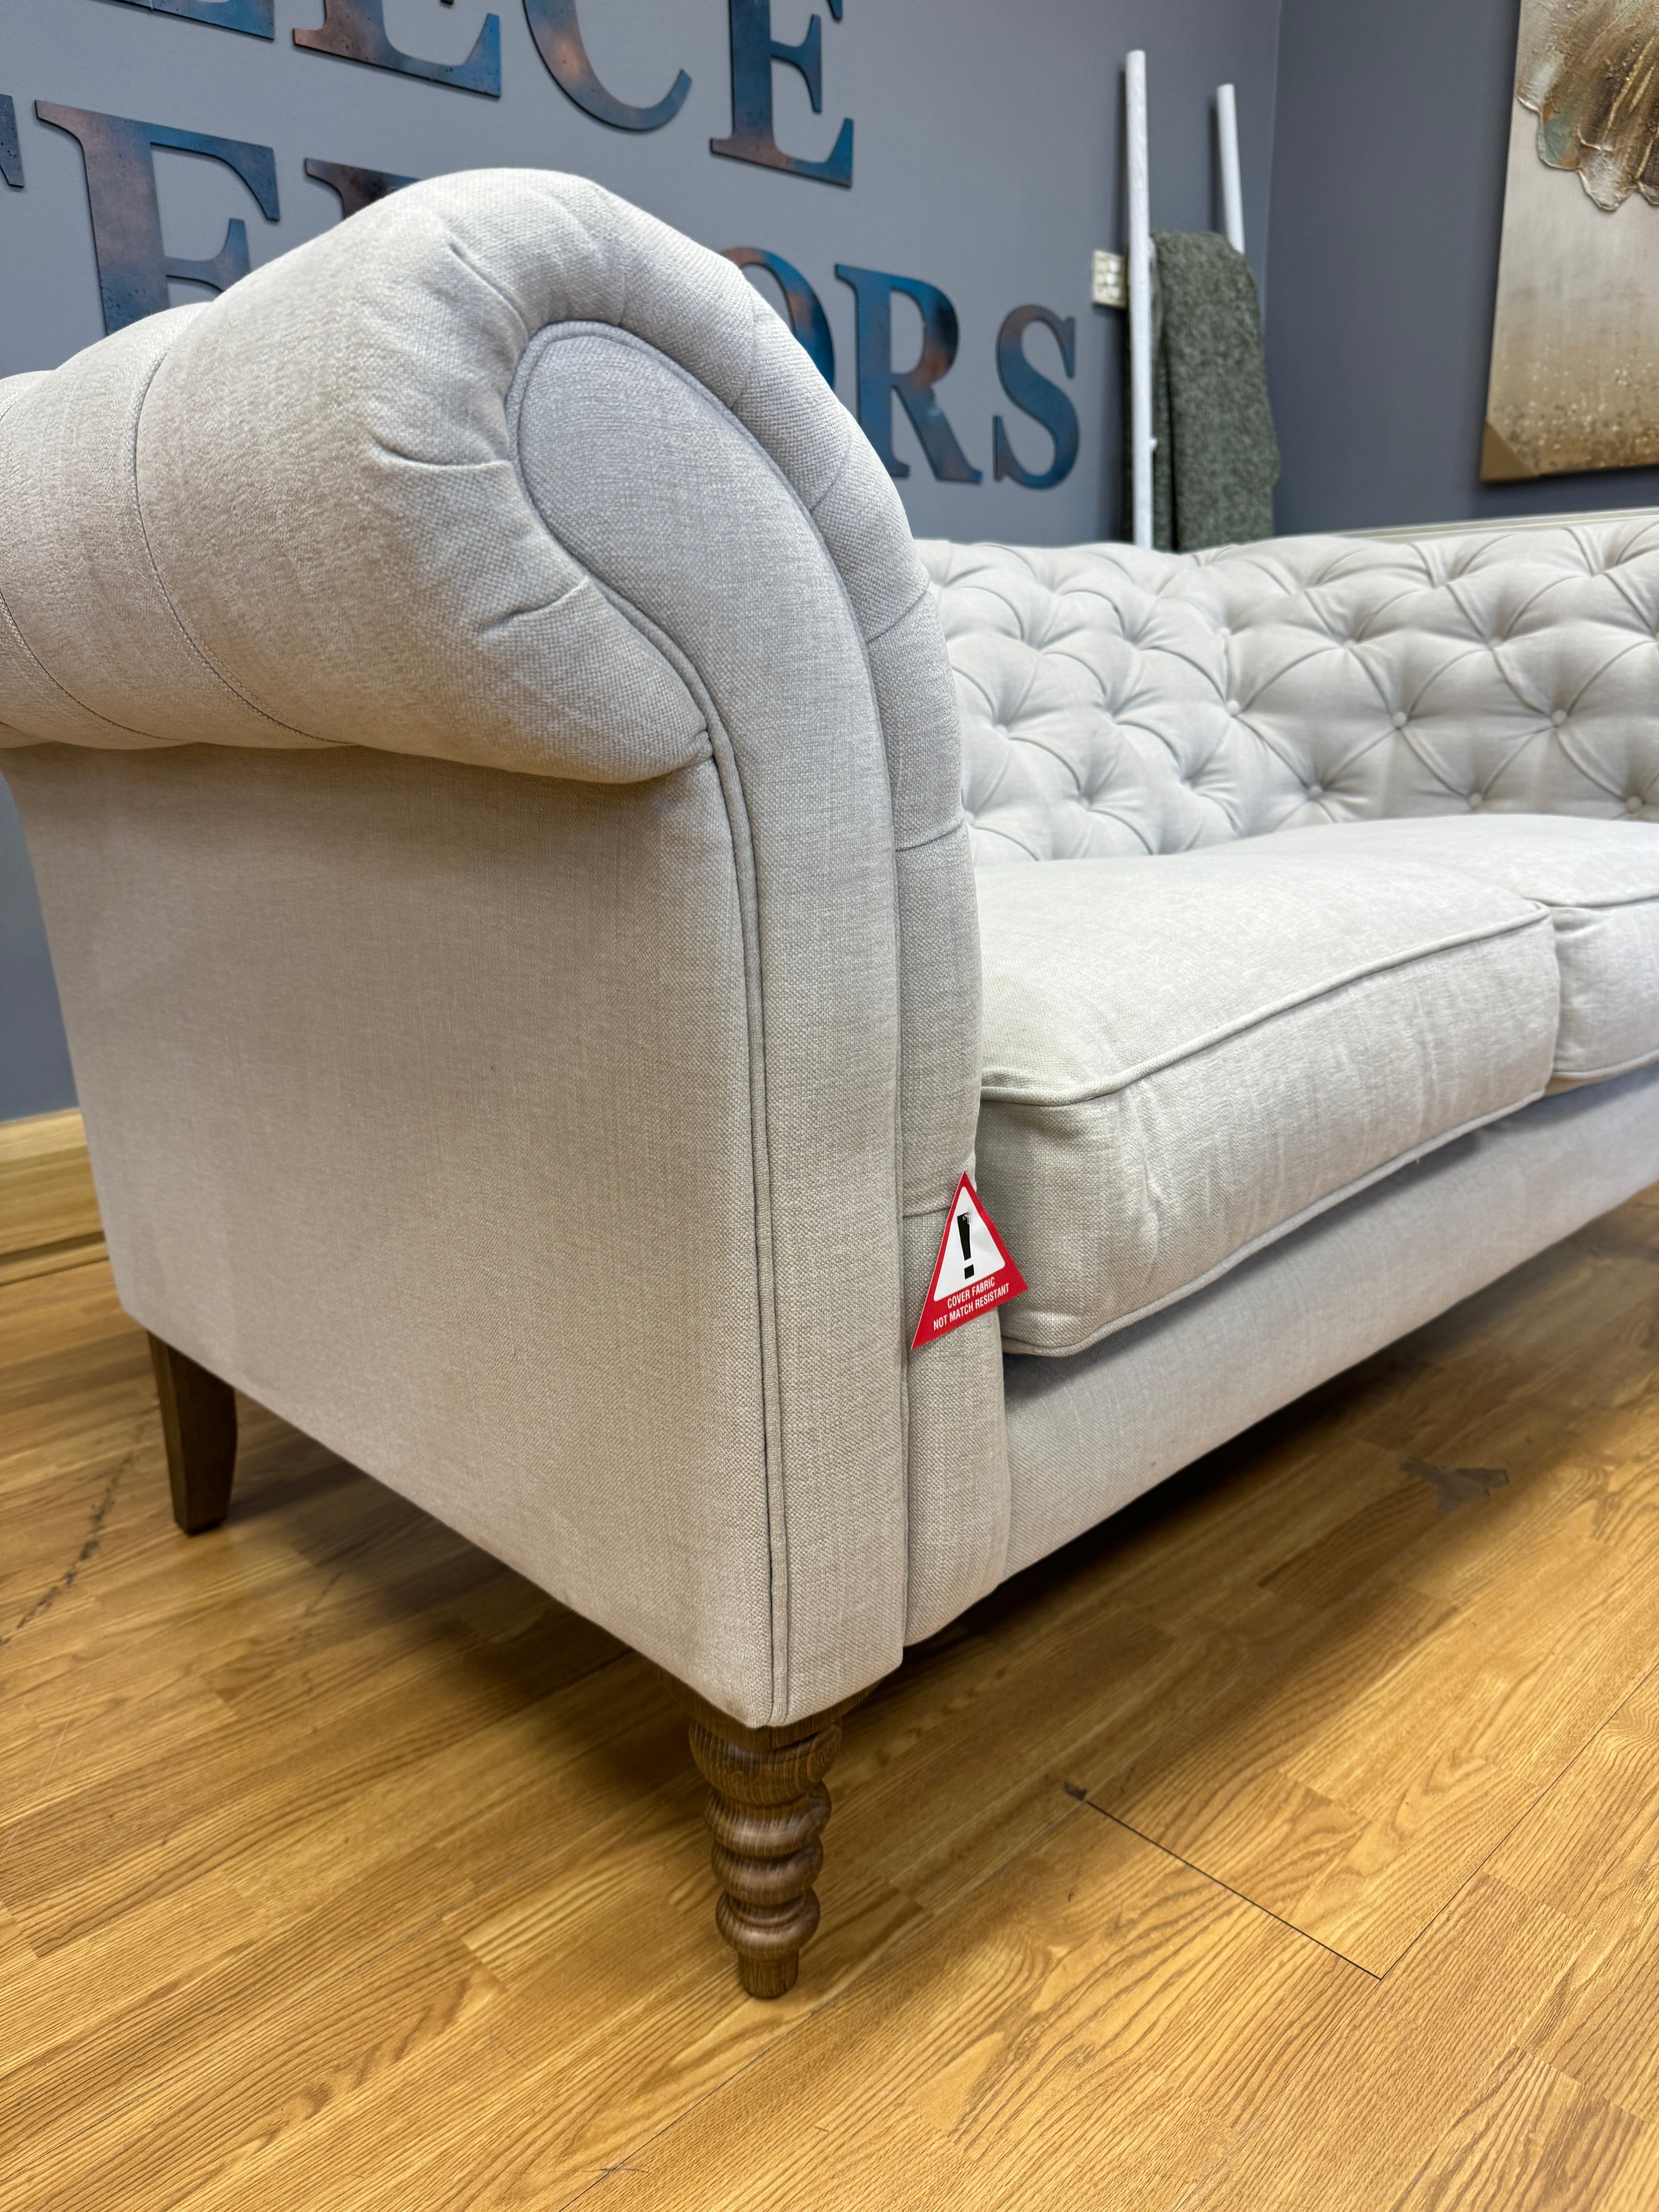 SOFA.COM Oscar 2 seater Chesterfield sofa Taupe brushed linen cotton